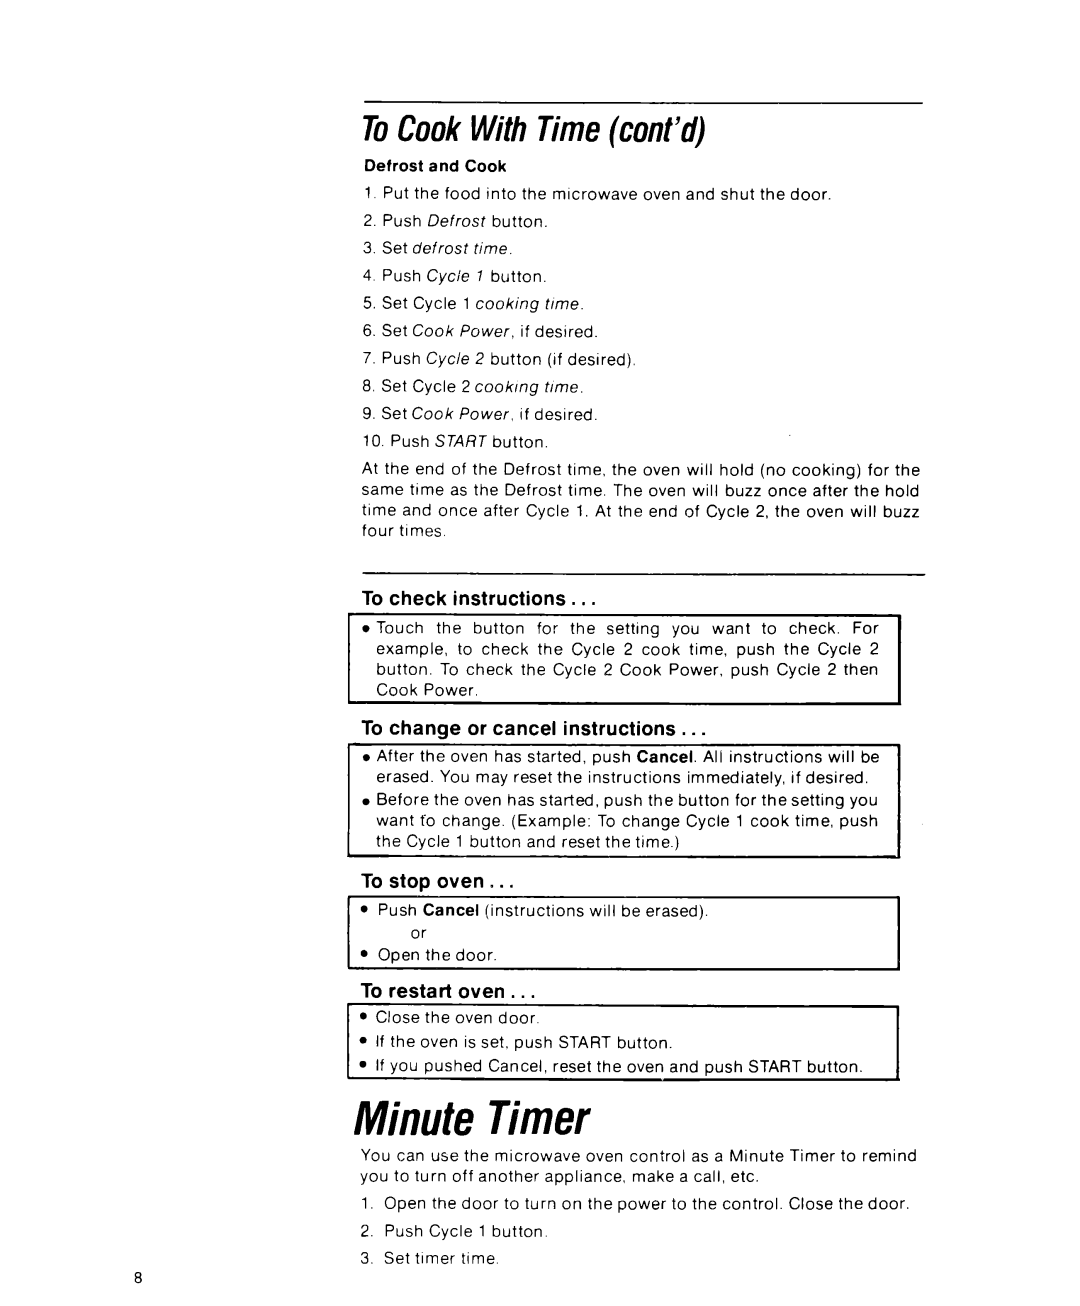 Whirlpool RJM 7700 Minute Timer, To check instructions, To change or cancel instructions, To stop oven, To restart oven 